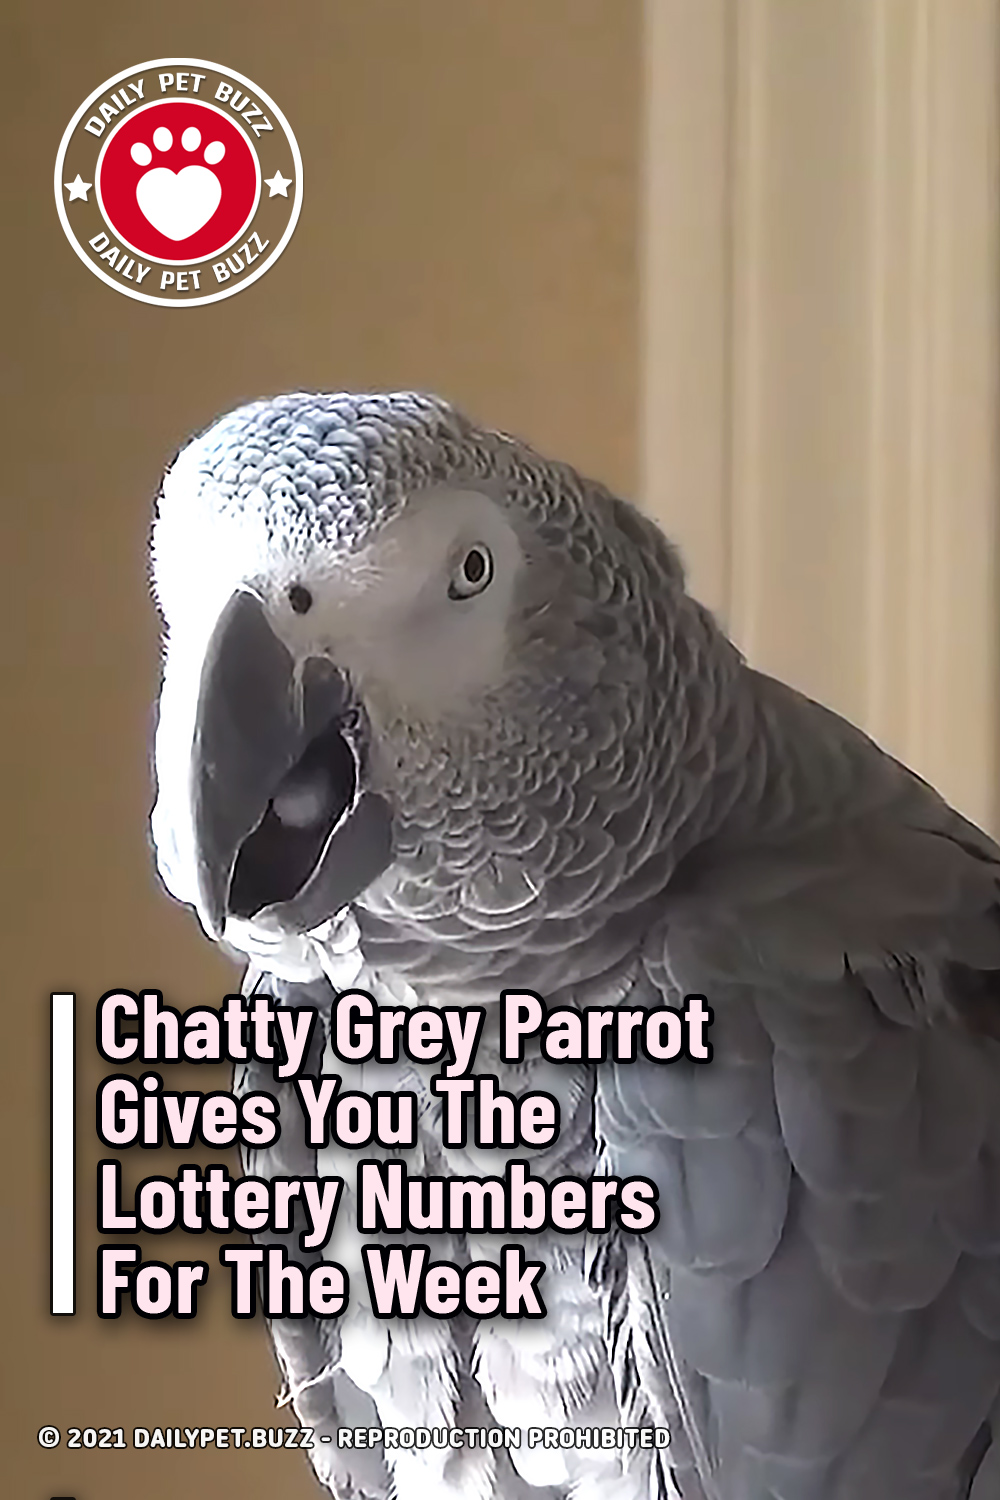 Chatty Grey Parrot Gives You The Lottery Numbers For The Week